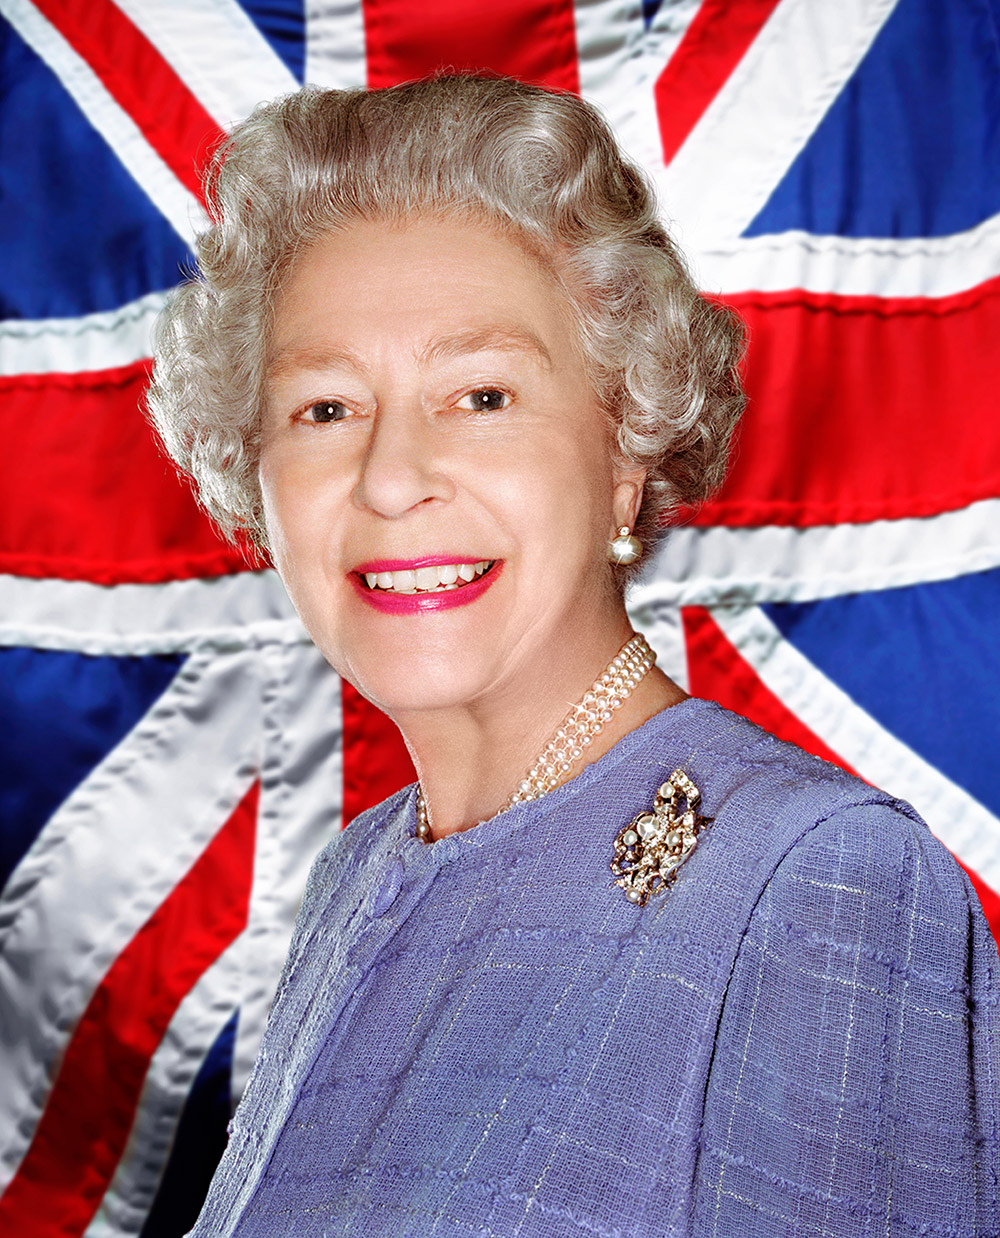 The Queen by Rankin